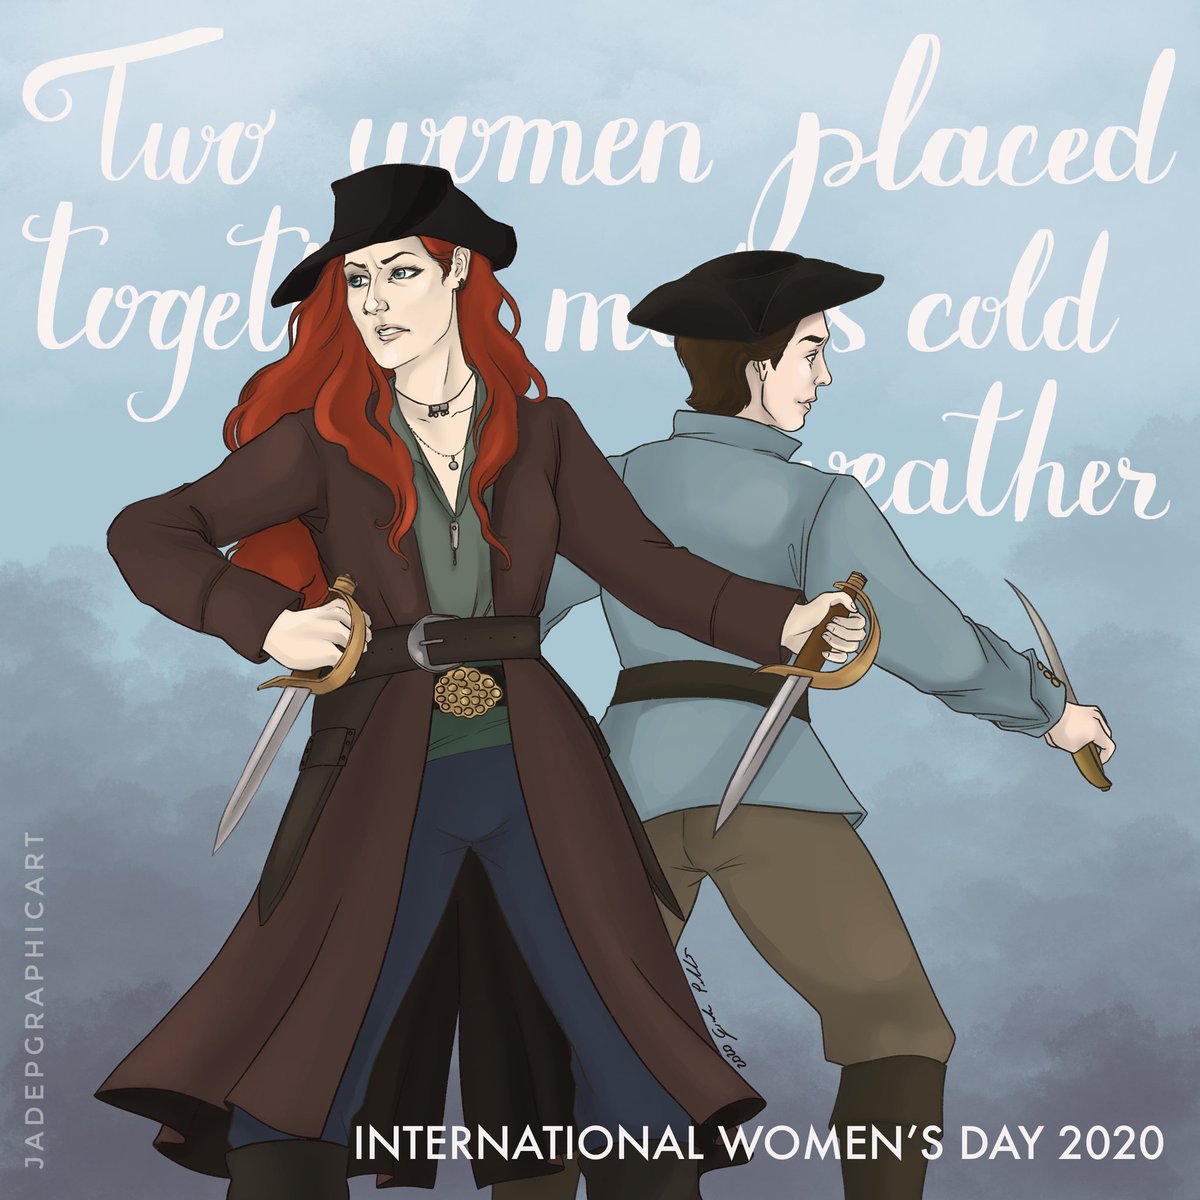 Jade Celebrating Internationalwomensday With A Fanart Of Anne Bonny And Mary Read Blacksails Version The Quote Is From Shakespeare Because I Wanted To Honour Shakespearesunday As Well Iwd